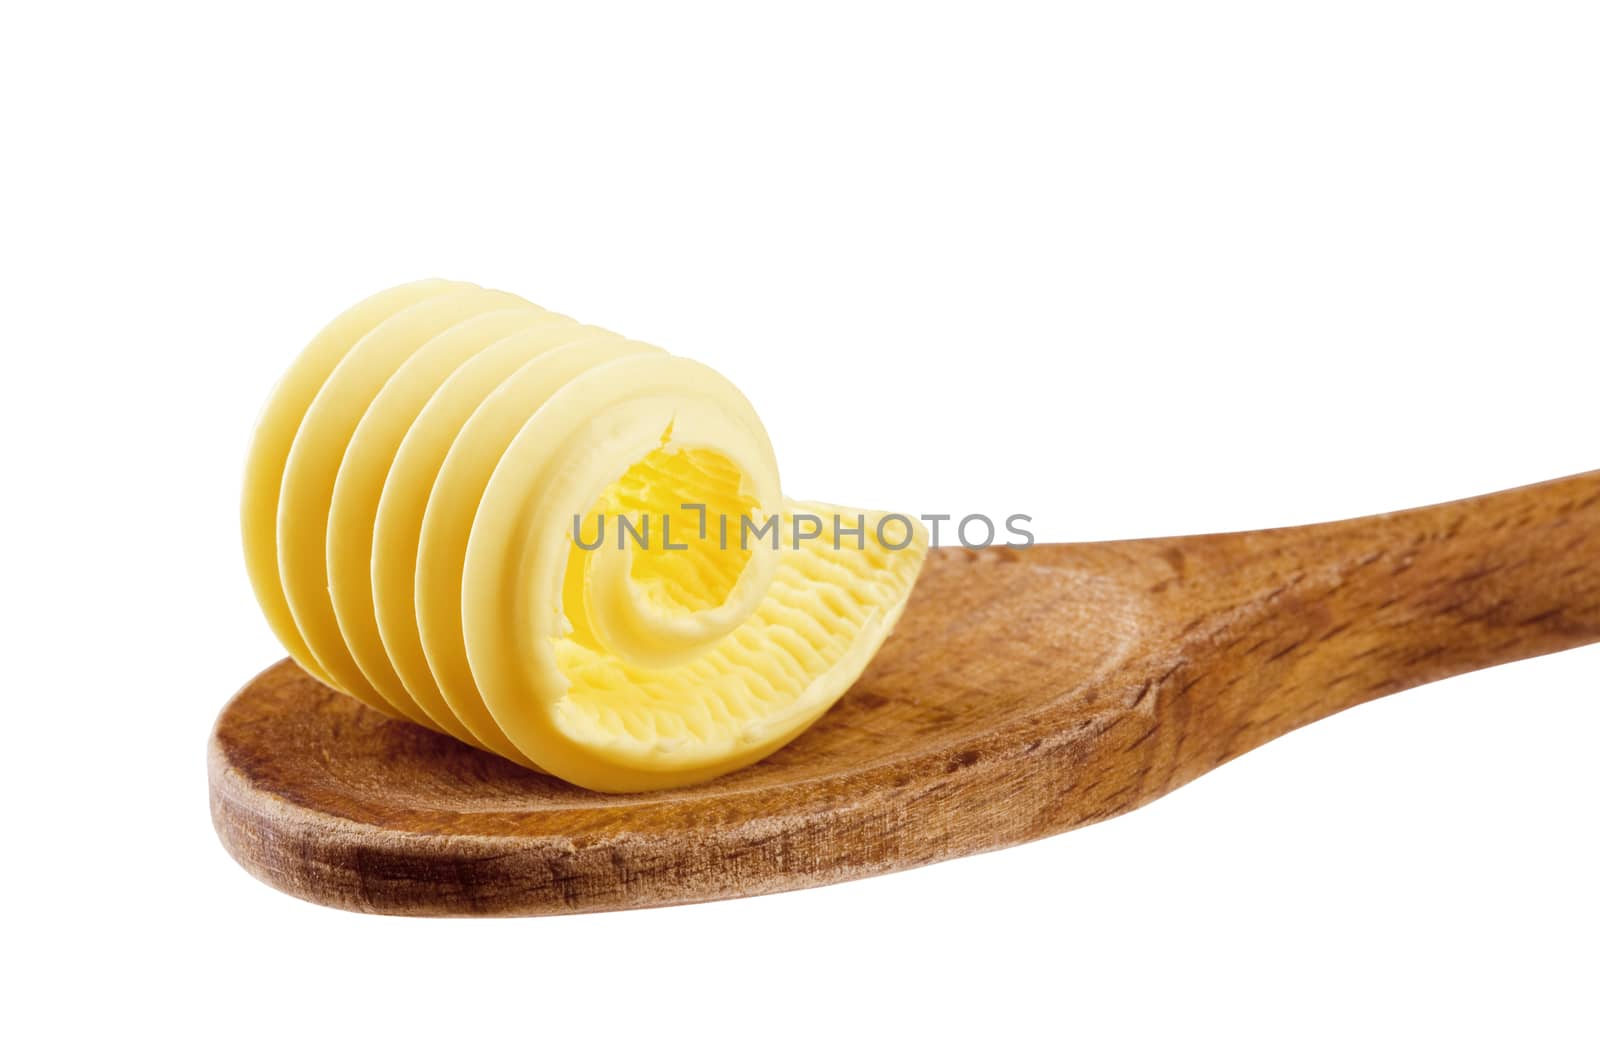 Butter curl on a wooden spoon - cutout